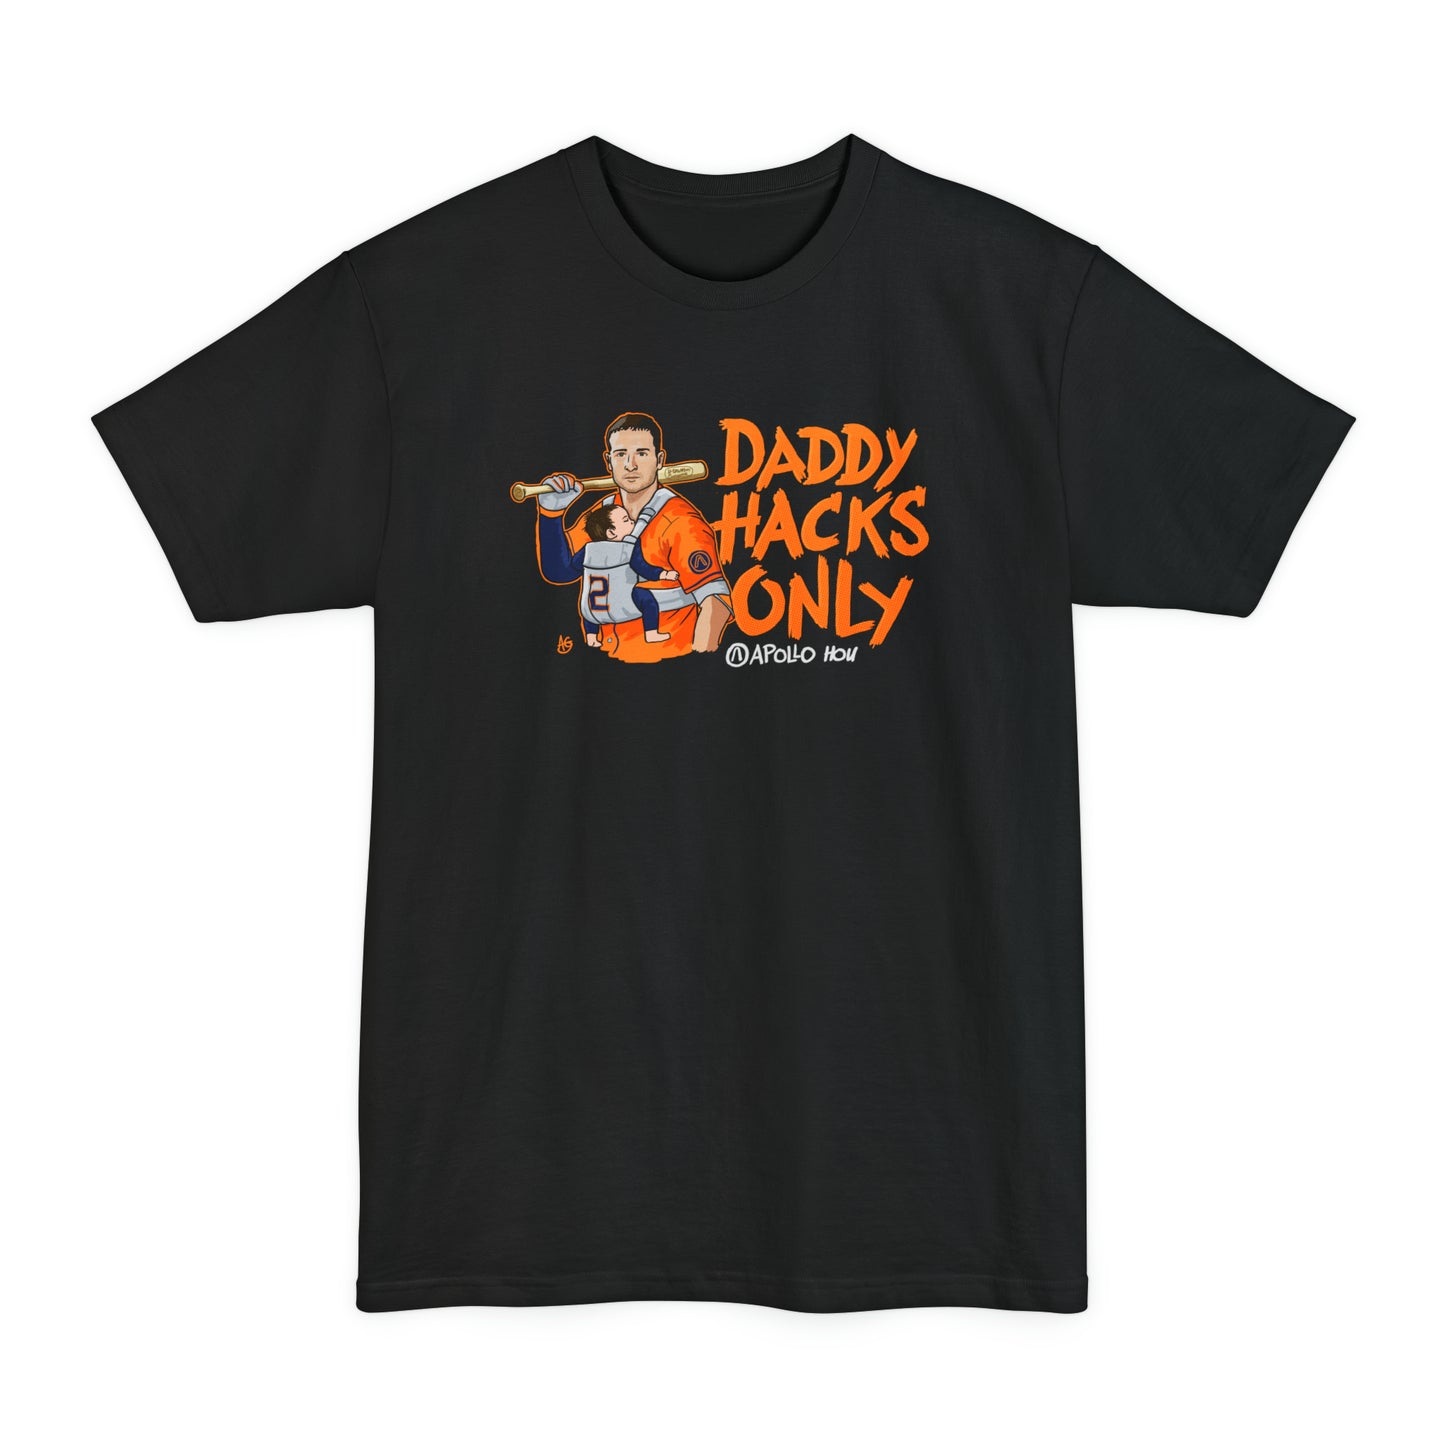 Daddy Hacks Only BIG & TALL Unisex Tall Beefy-T® T-Shirt